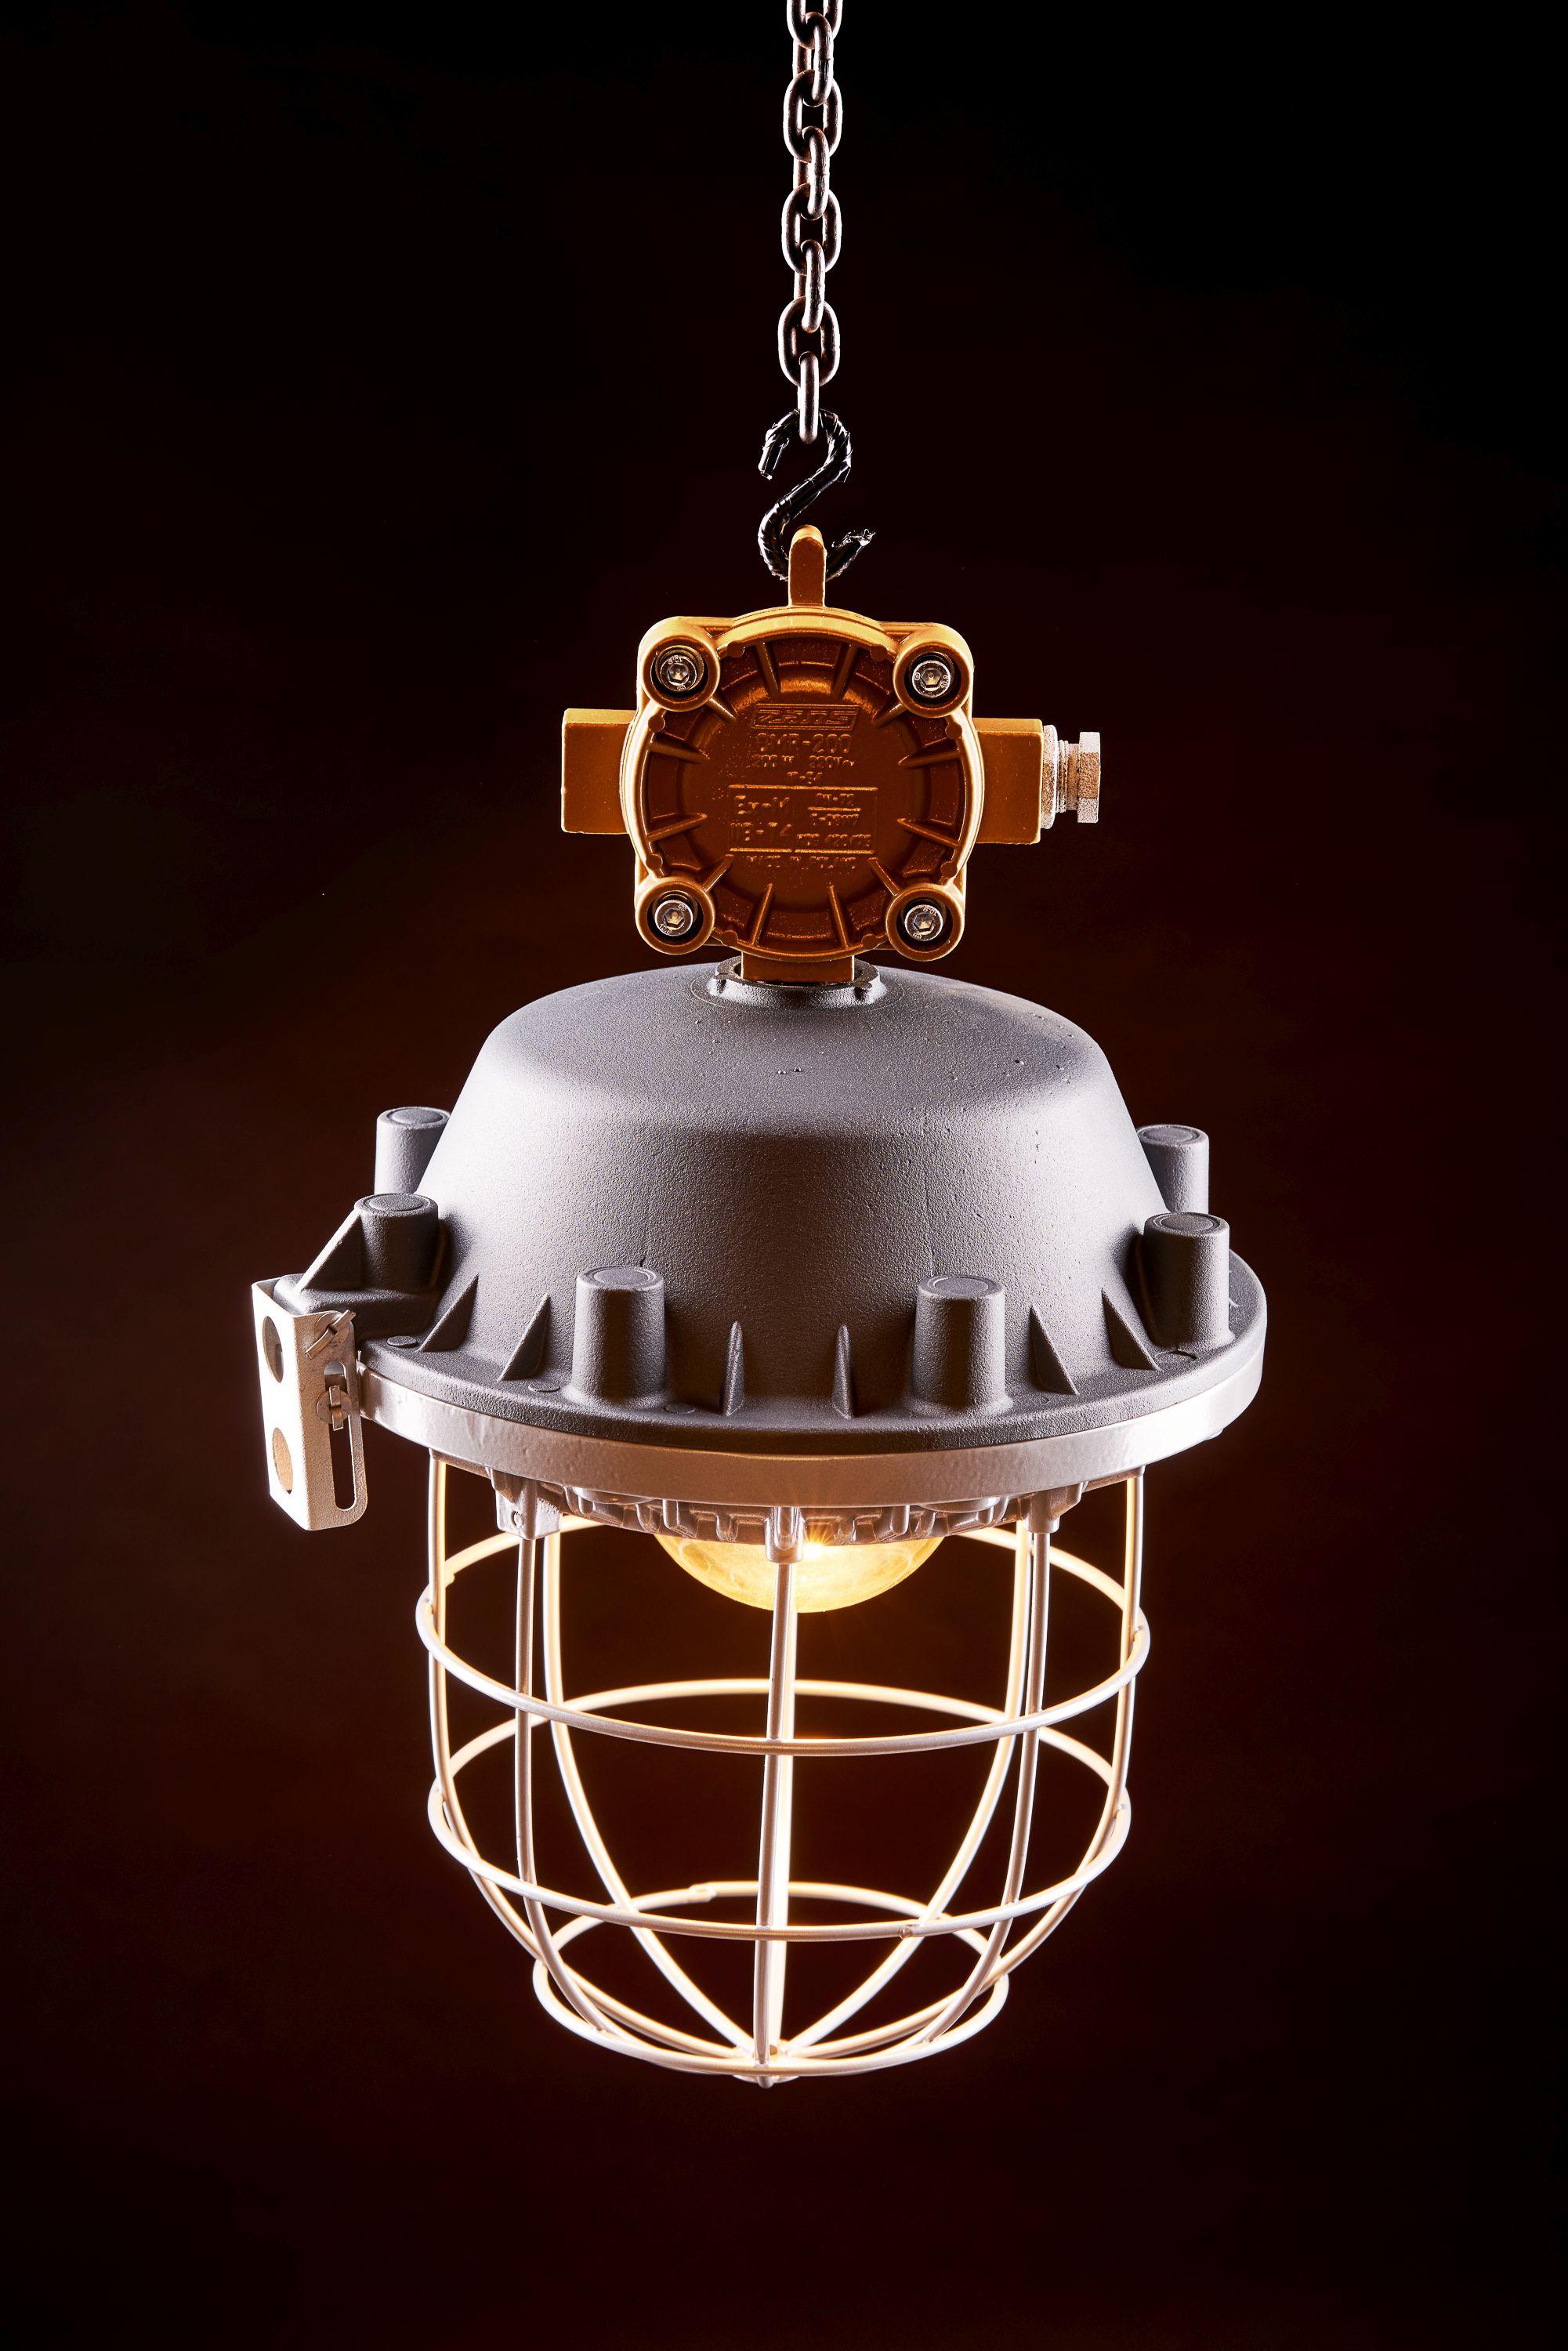 Primary use:
The OMP-200 lamp was designed to illuminate factory and industrial spaces, where there was a risk of gas and steam explosions. Its structure provided protection against dust and water.
Manufacturer: ZAOS Zaklady Sprzetu